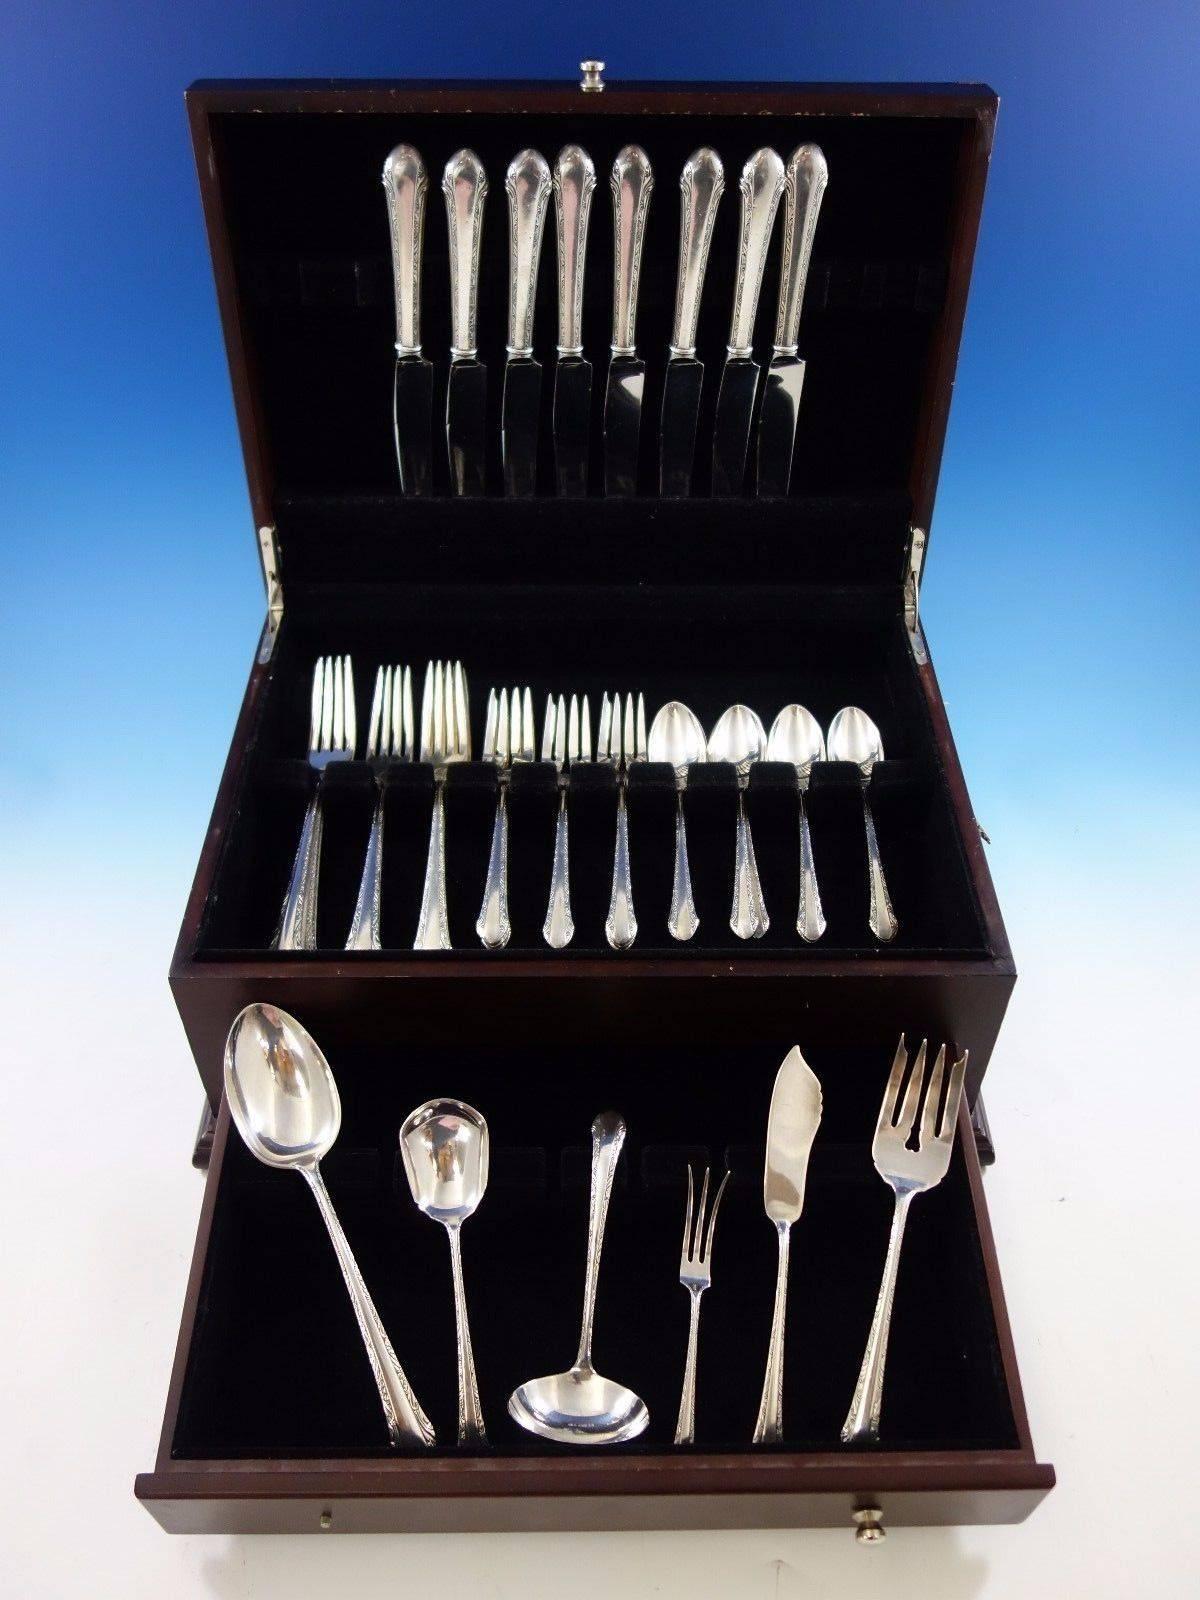 Chased Romantique by Alvin sterling silver flatware set of 38 pieces. This set includes: 

Eight dinner knives, 9 5/8